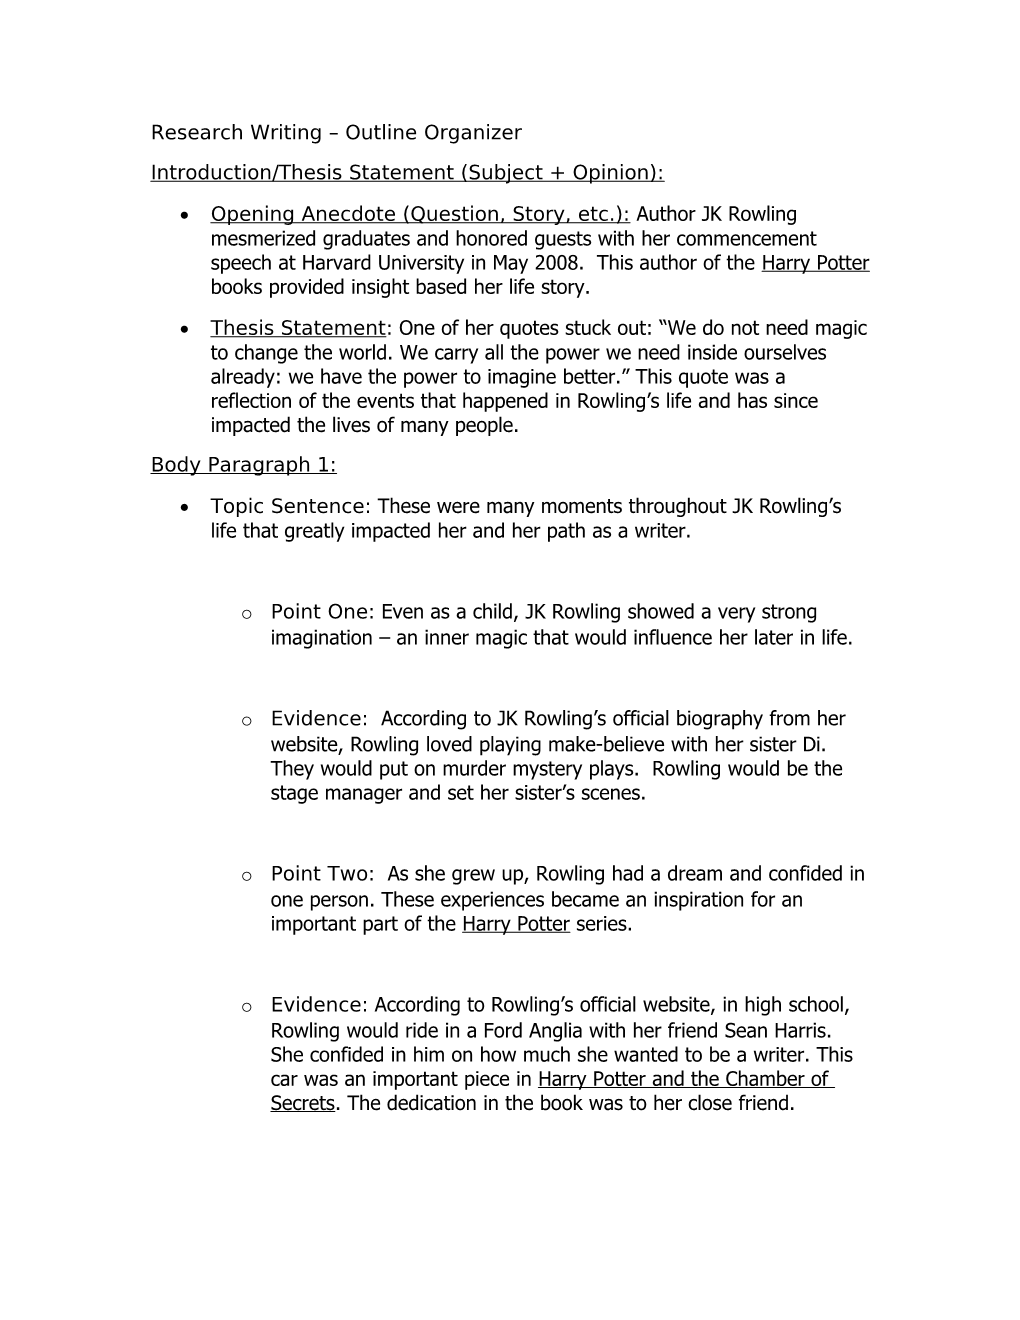 Research Writing Outline Organizer